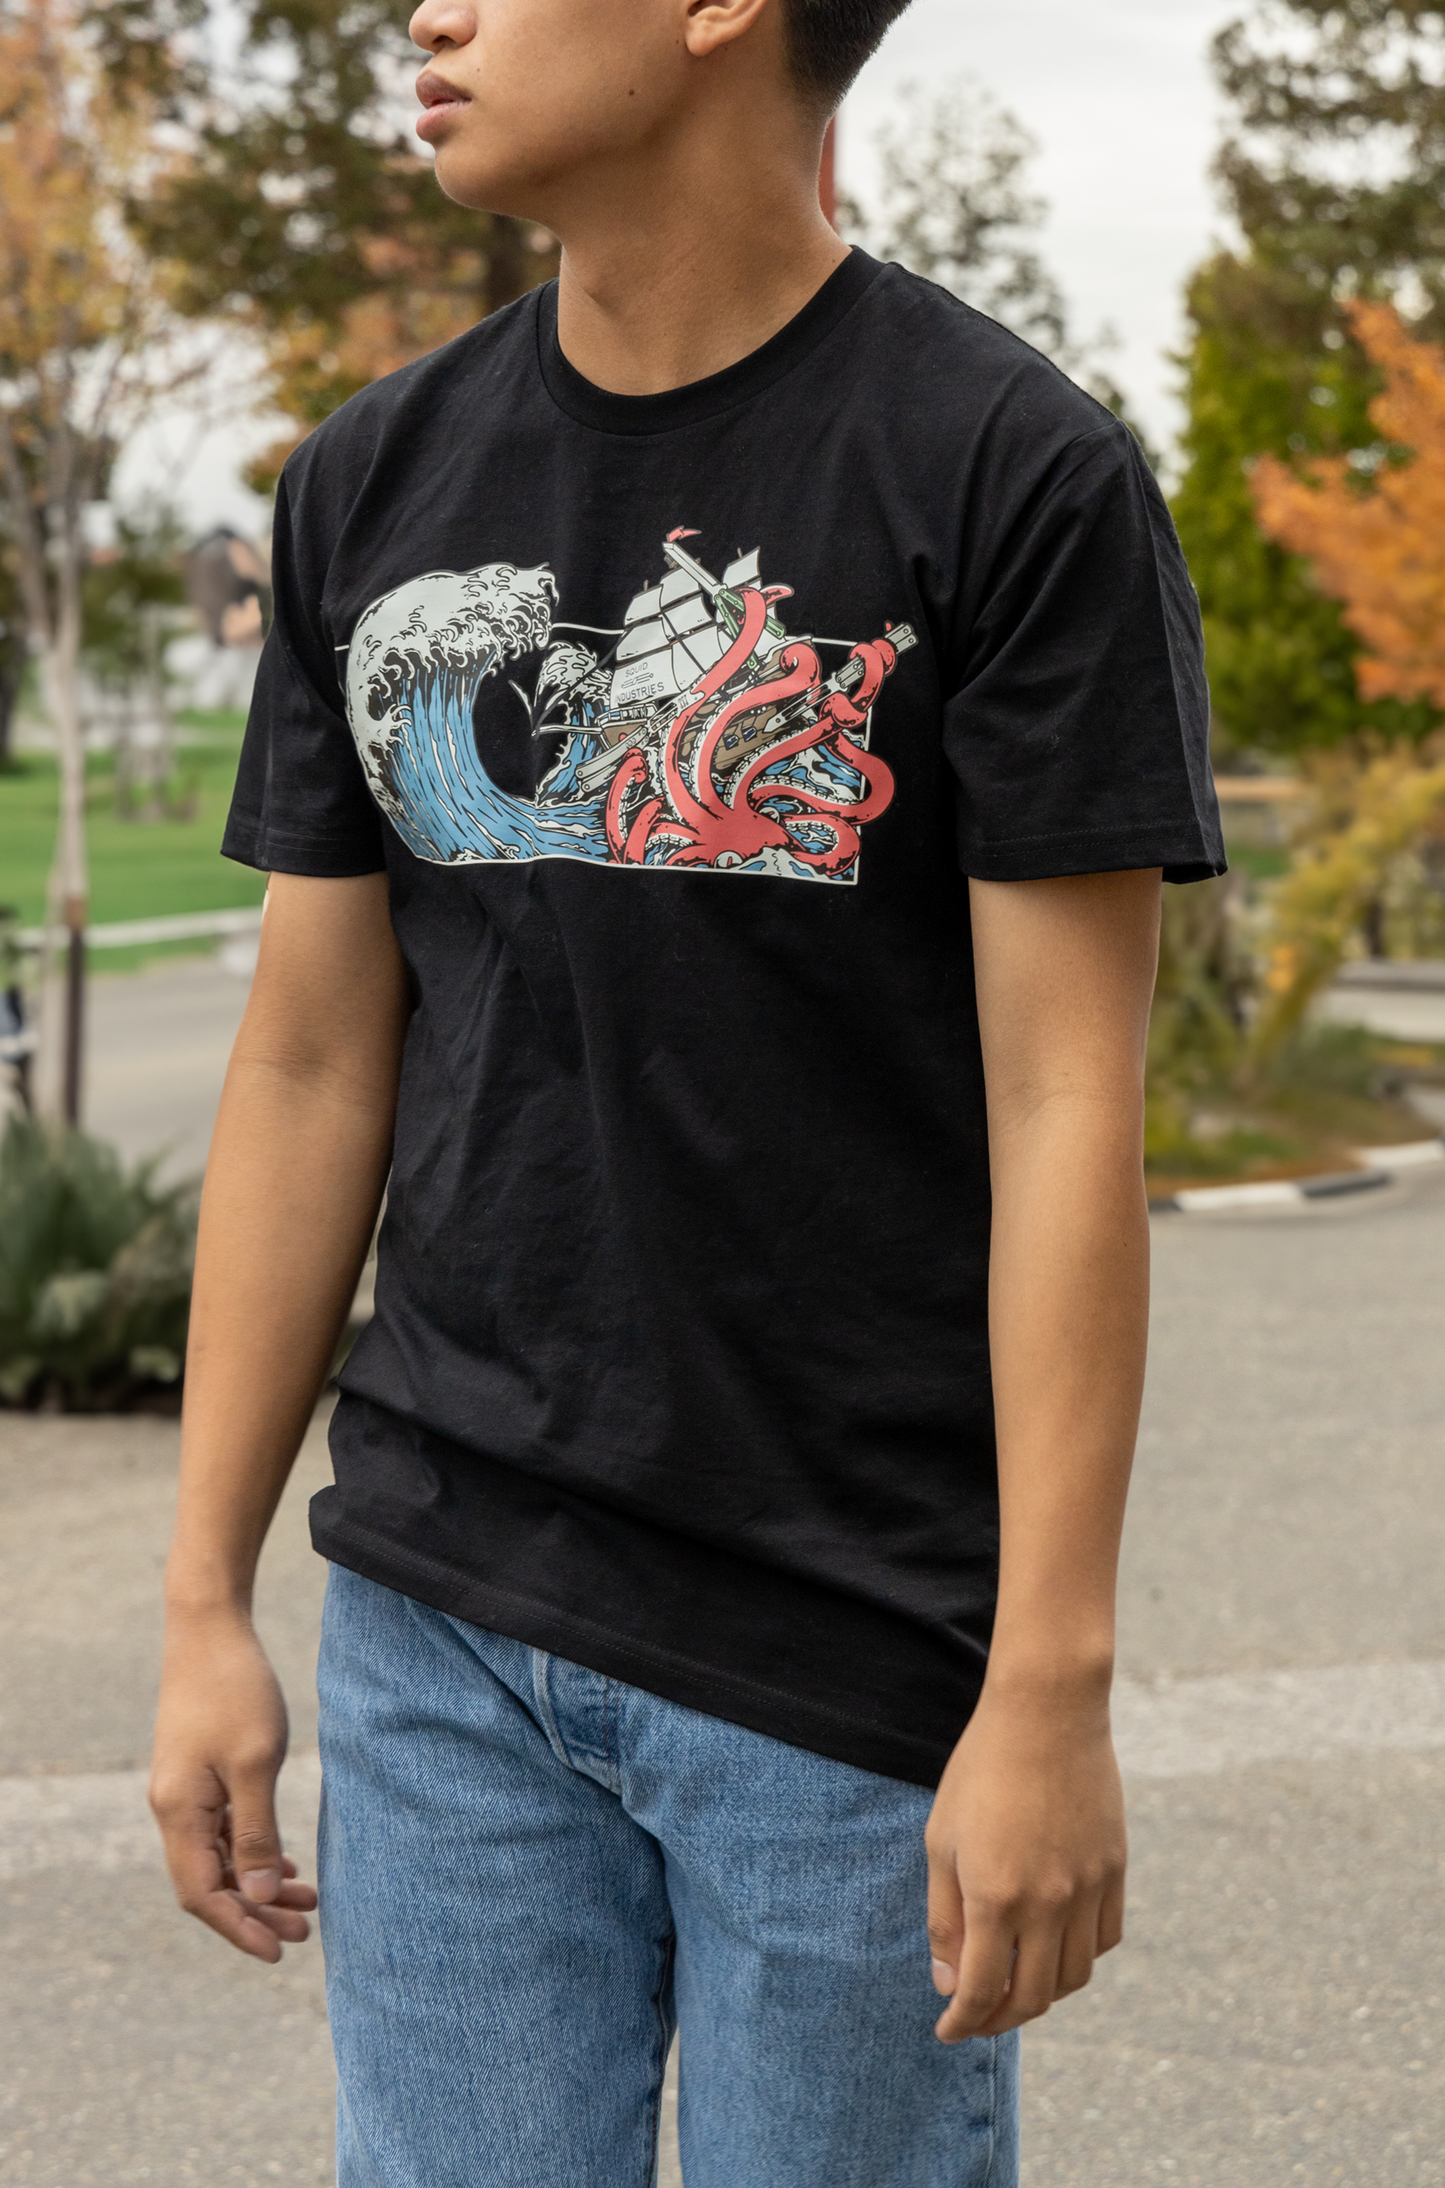 Man wearing a Squid Industries x Simple Stock Collaboration Black T-shirt featuring a Kraken in Tsunami waves holding on the Squid Industries balisongs